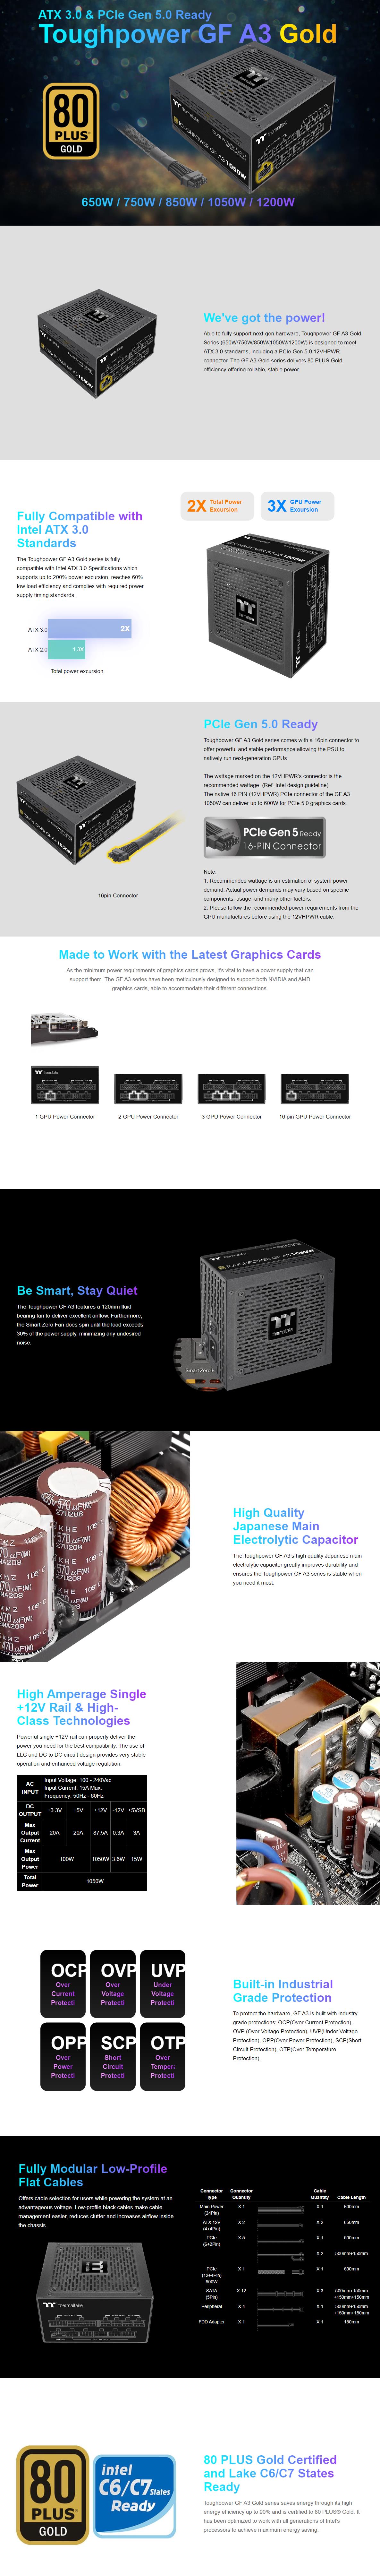 A large marketing image providing additional information about the product Thermaltake Toughpower GF A3 - 1050W 80PLUS Gold PCIe 5.0 ATX Modular PSU - Additional alt info not provided